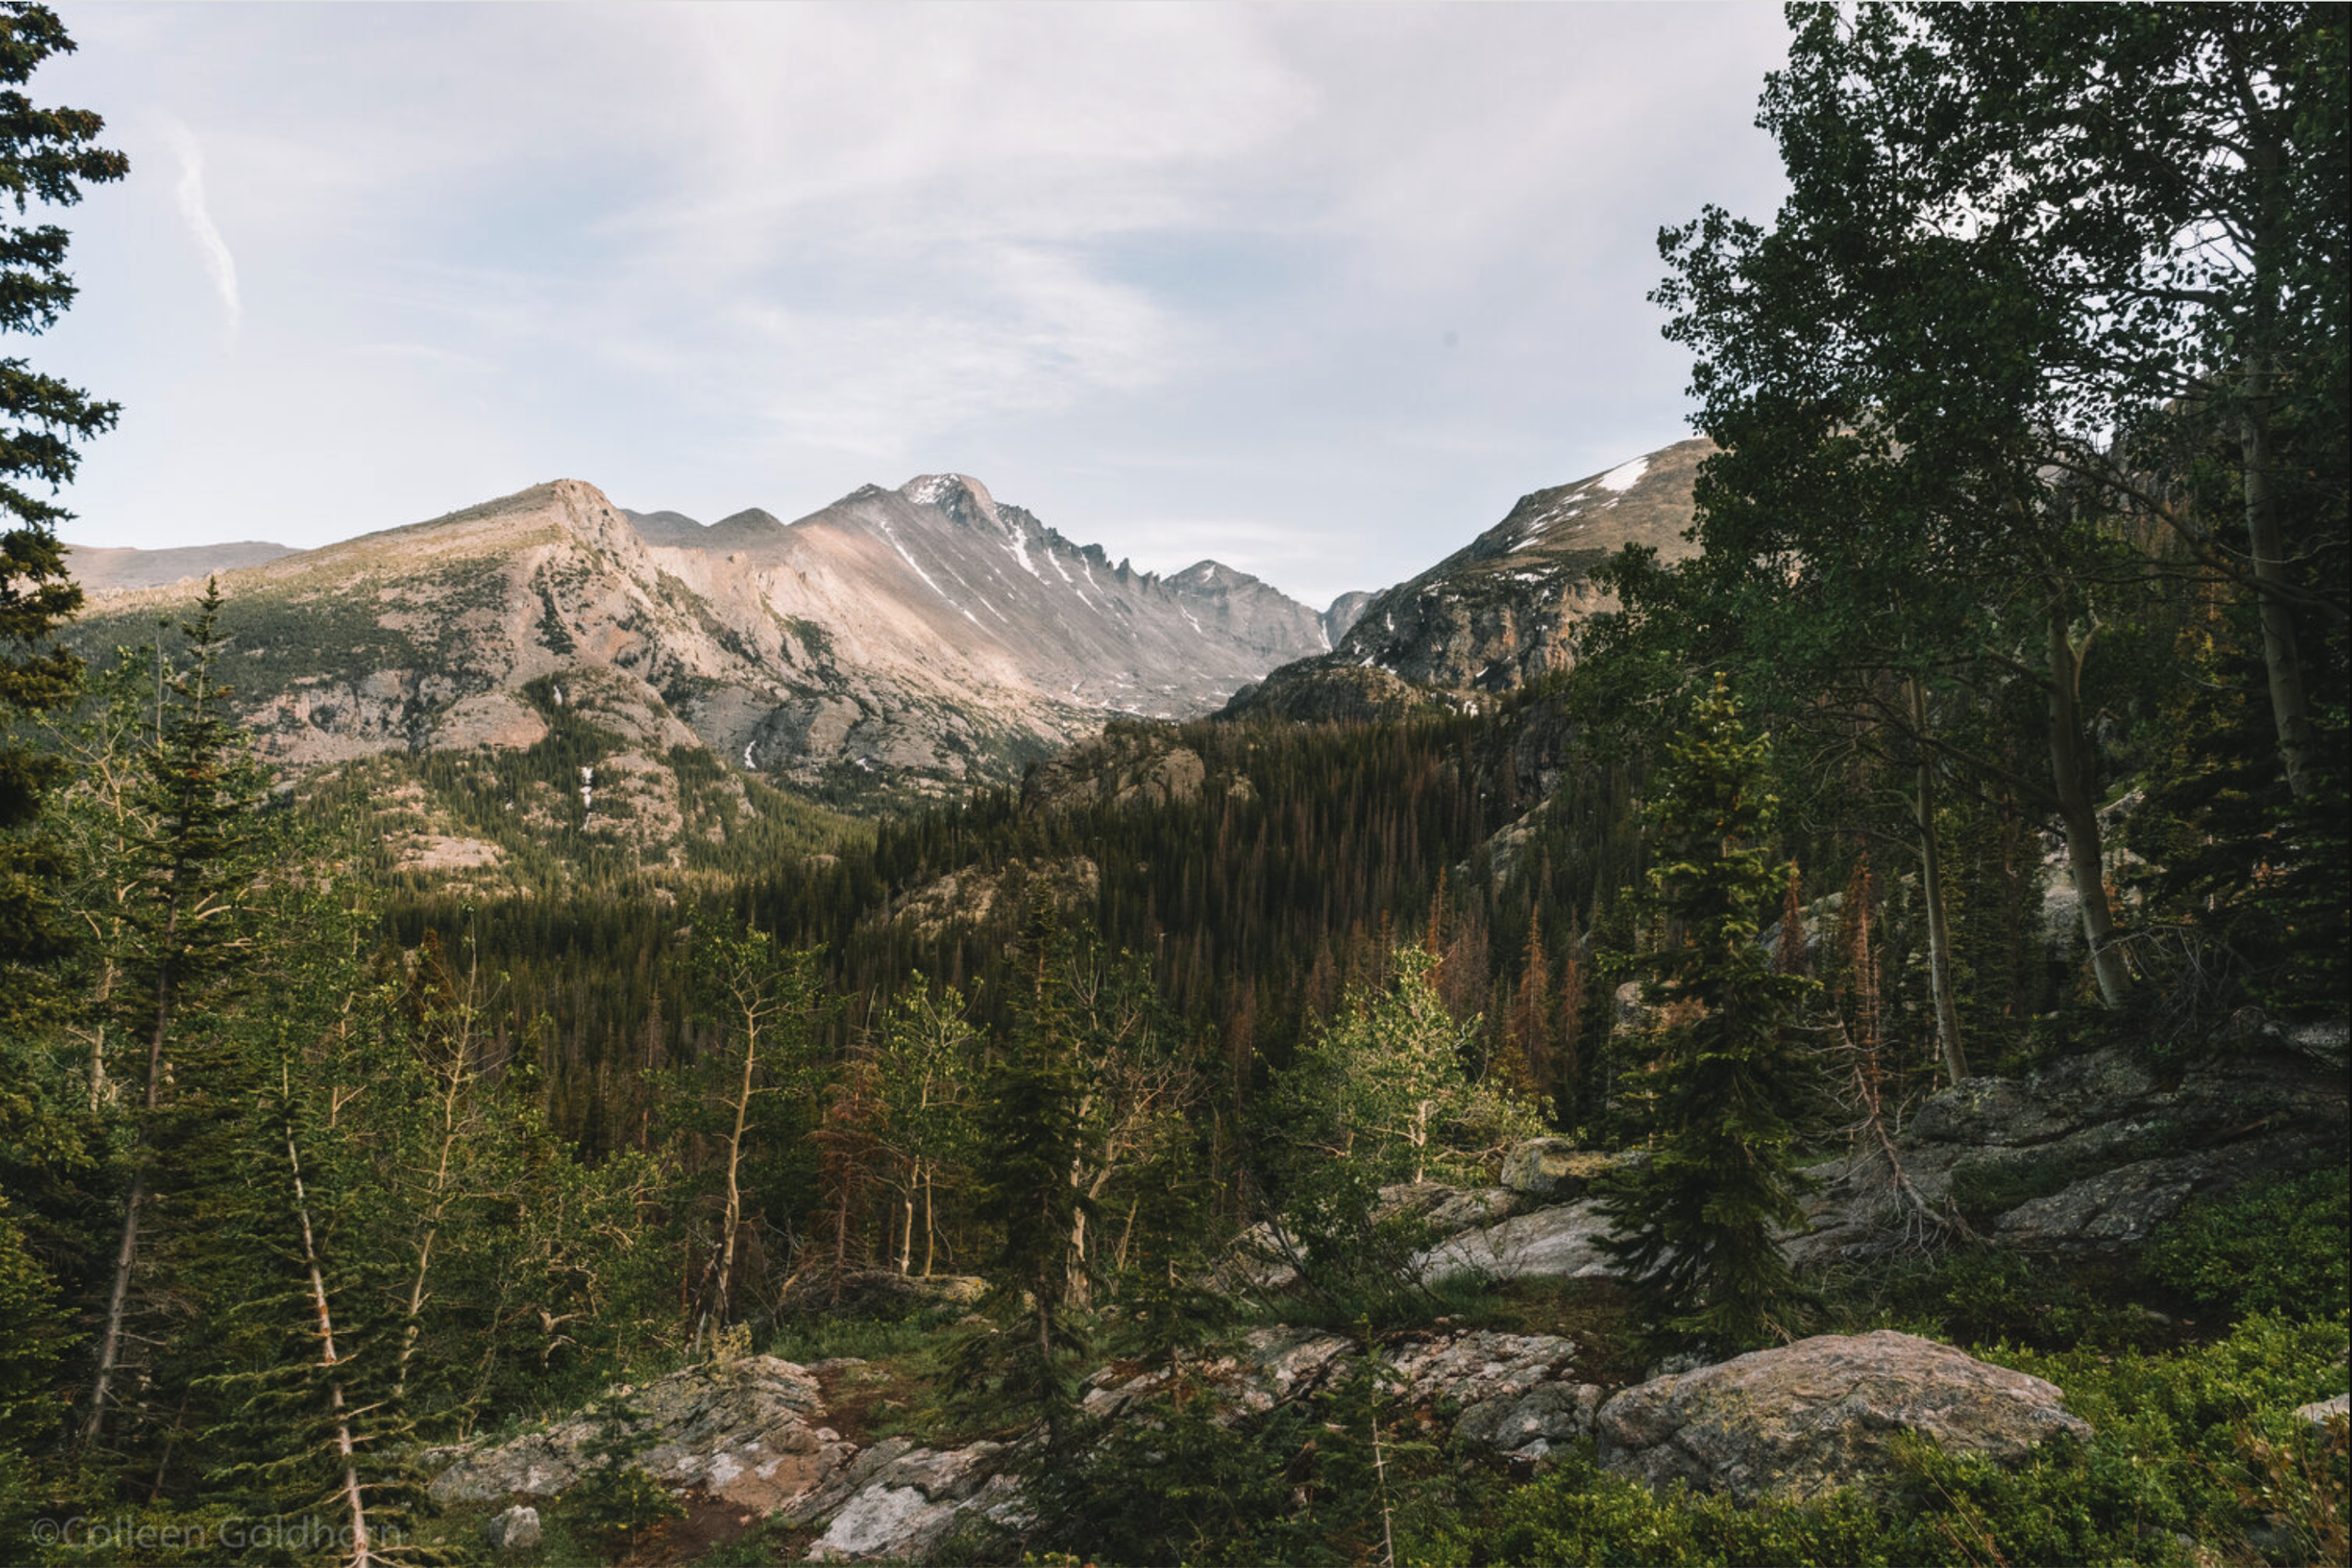 Colleen Goldhorn – How To Spend 48 Hours In Rocky Mountain National Park